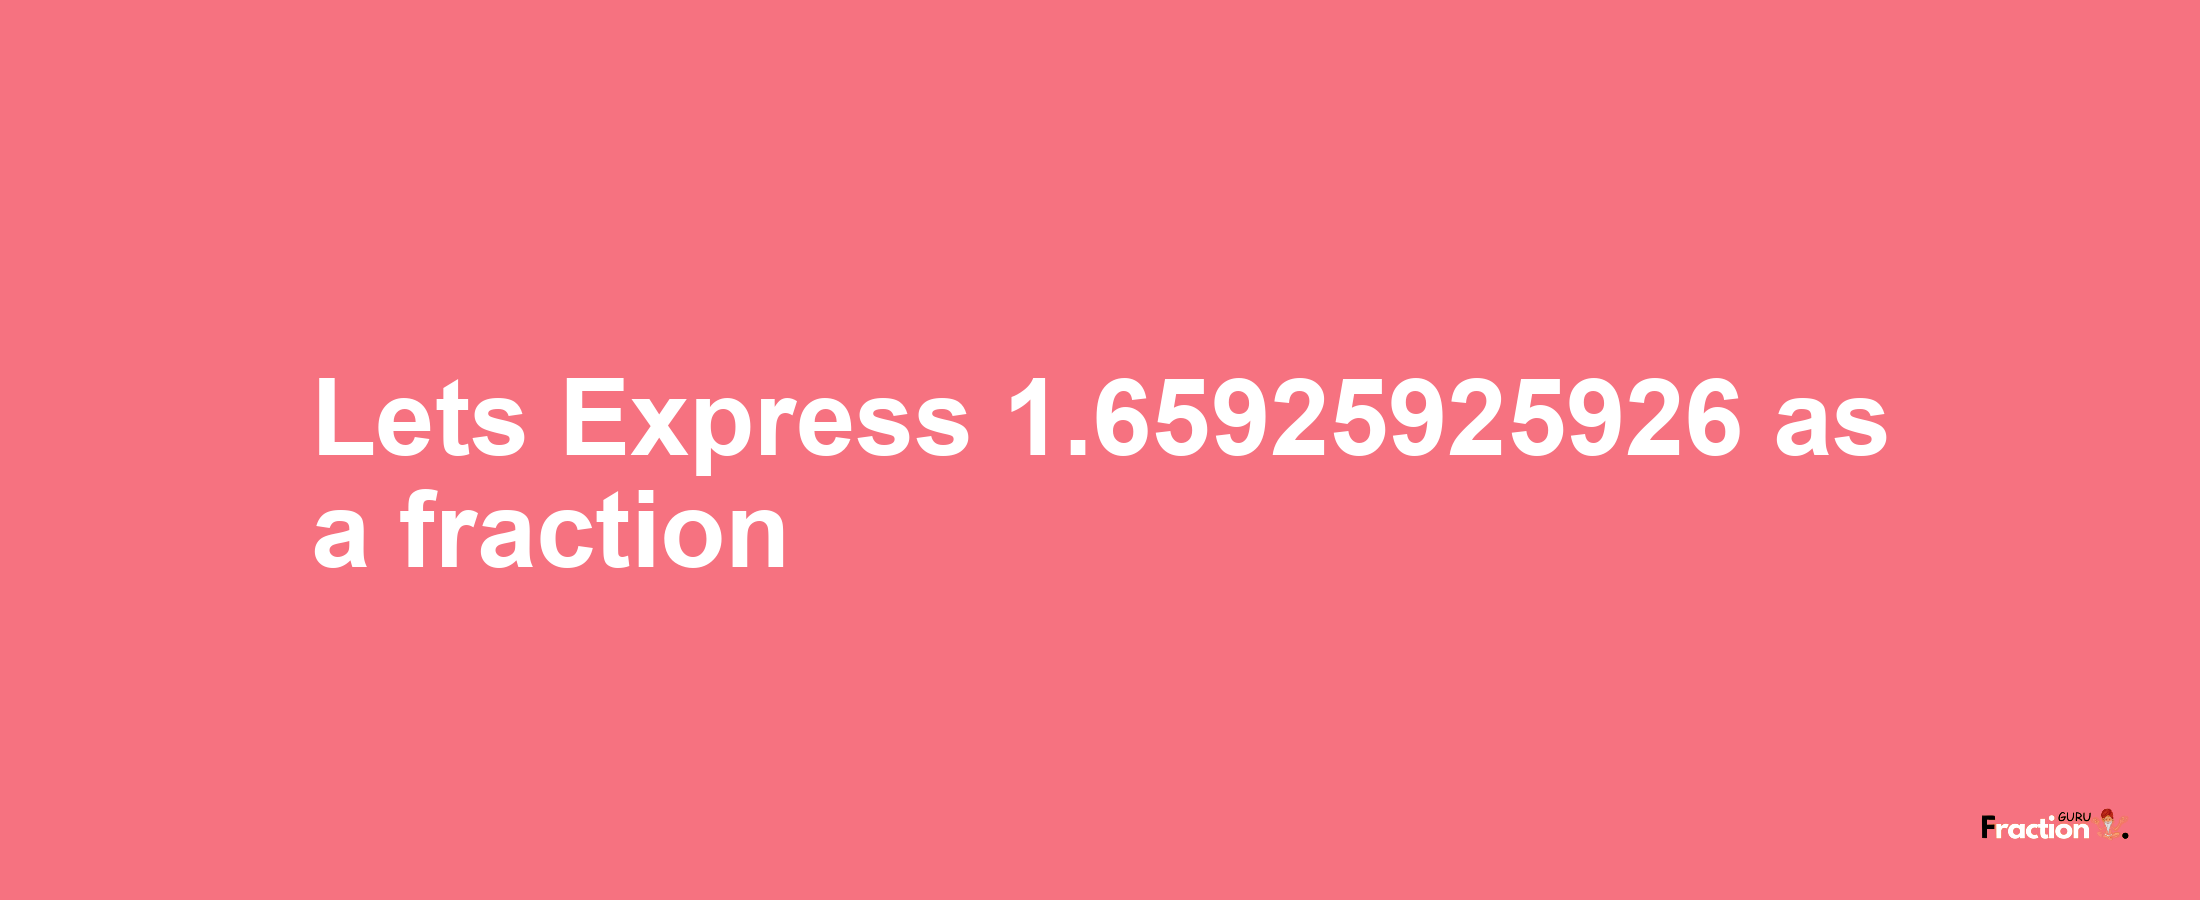 Lets Express 1.65925925926 as afraction